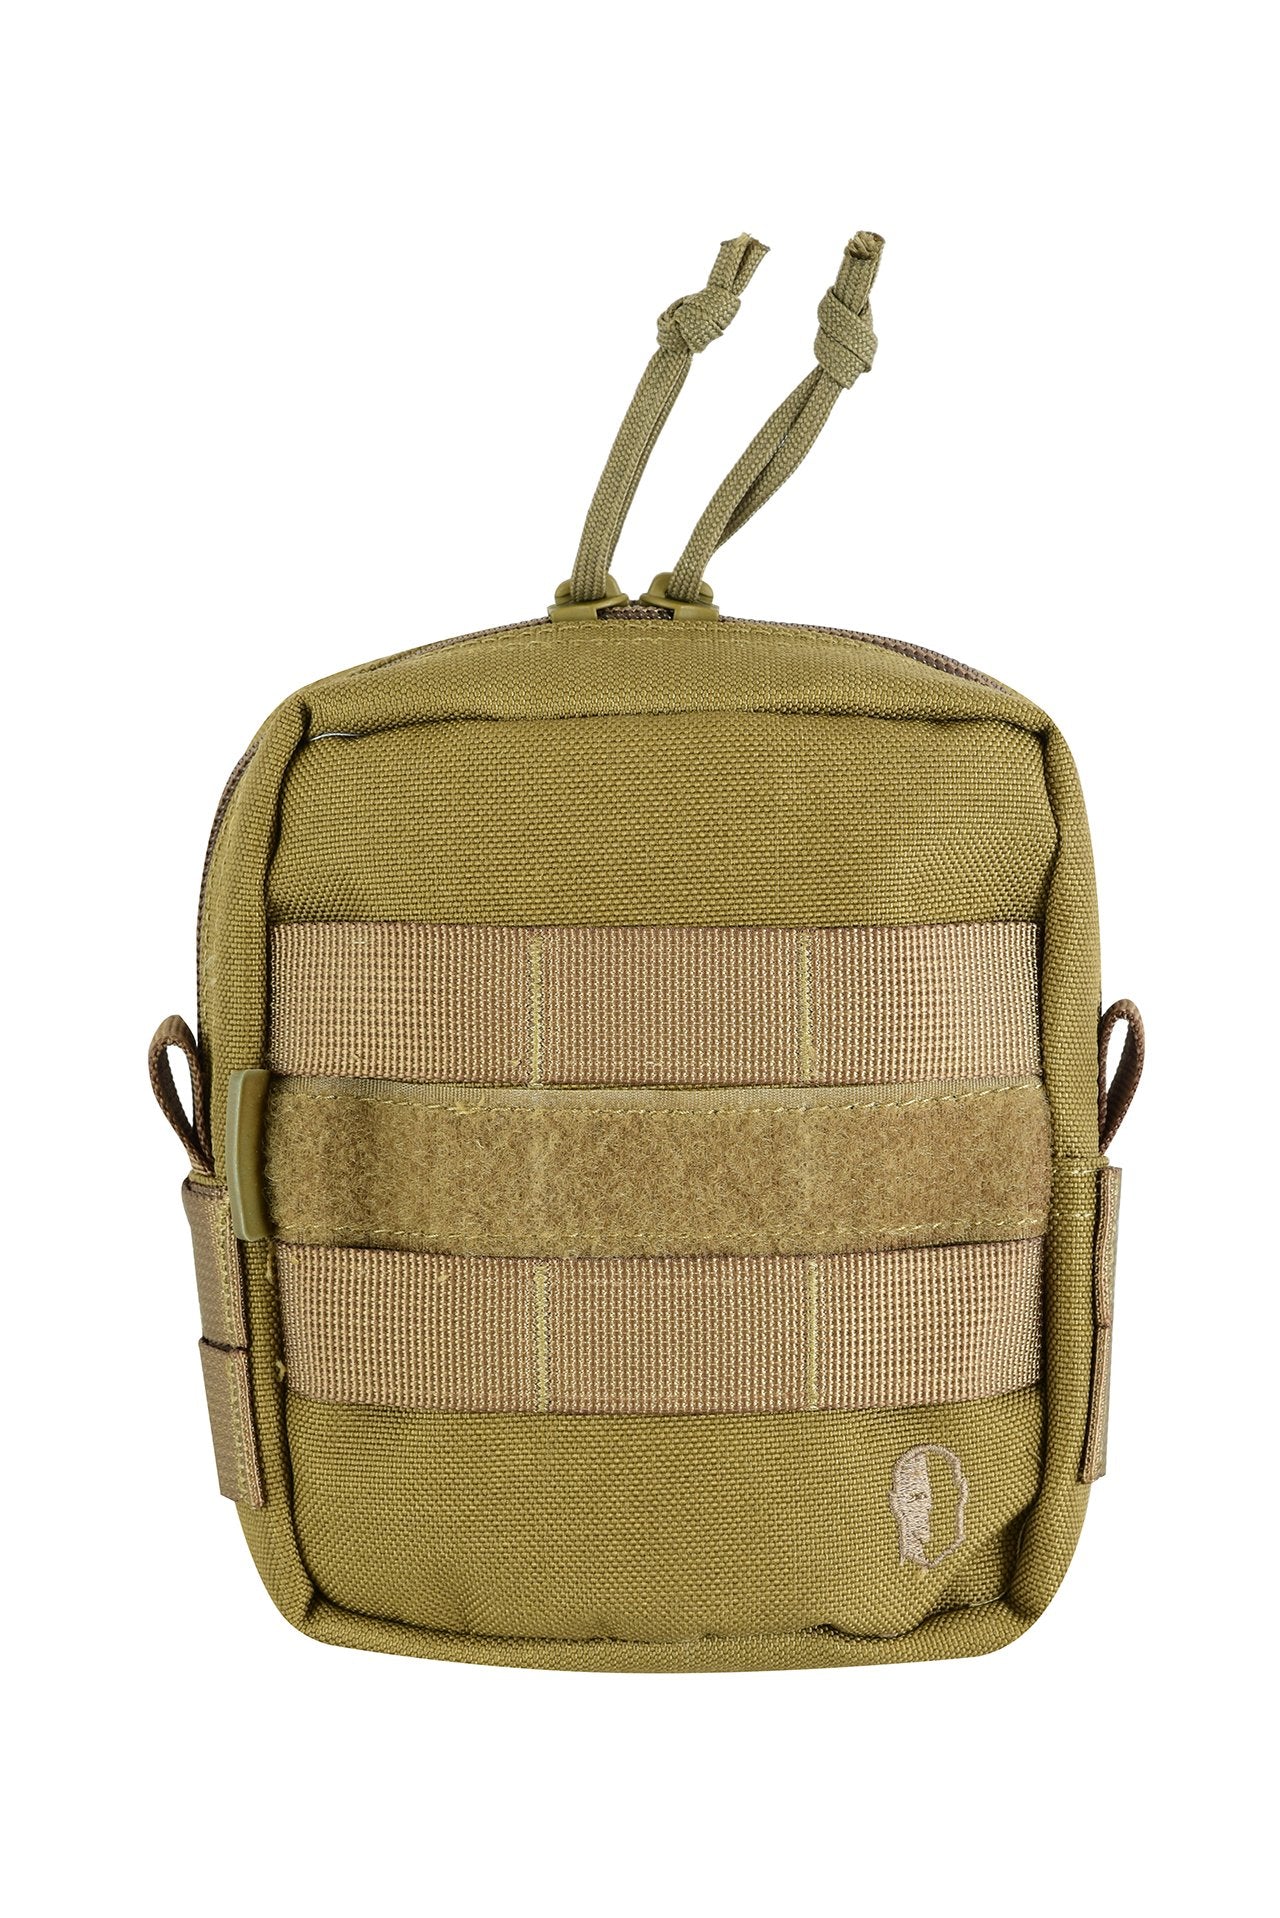 SHE-23033 SMALL  UTILITY  POUCH SAND